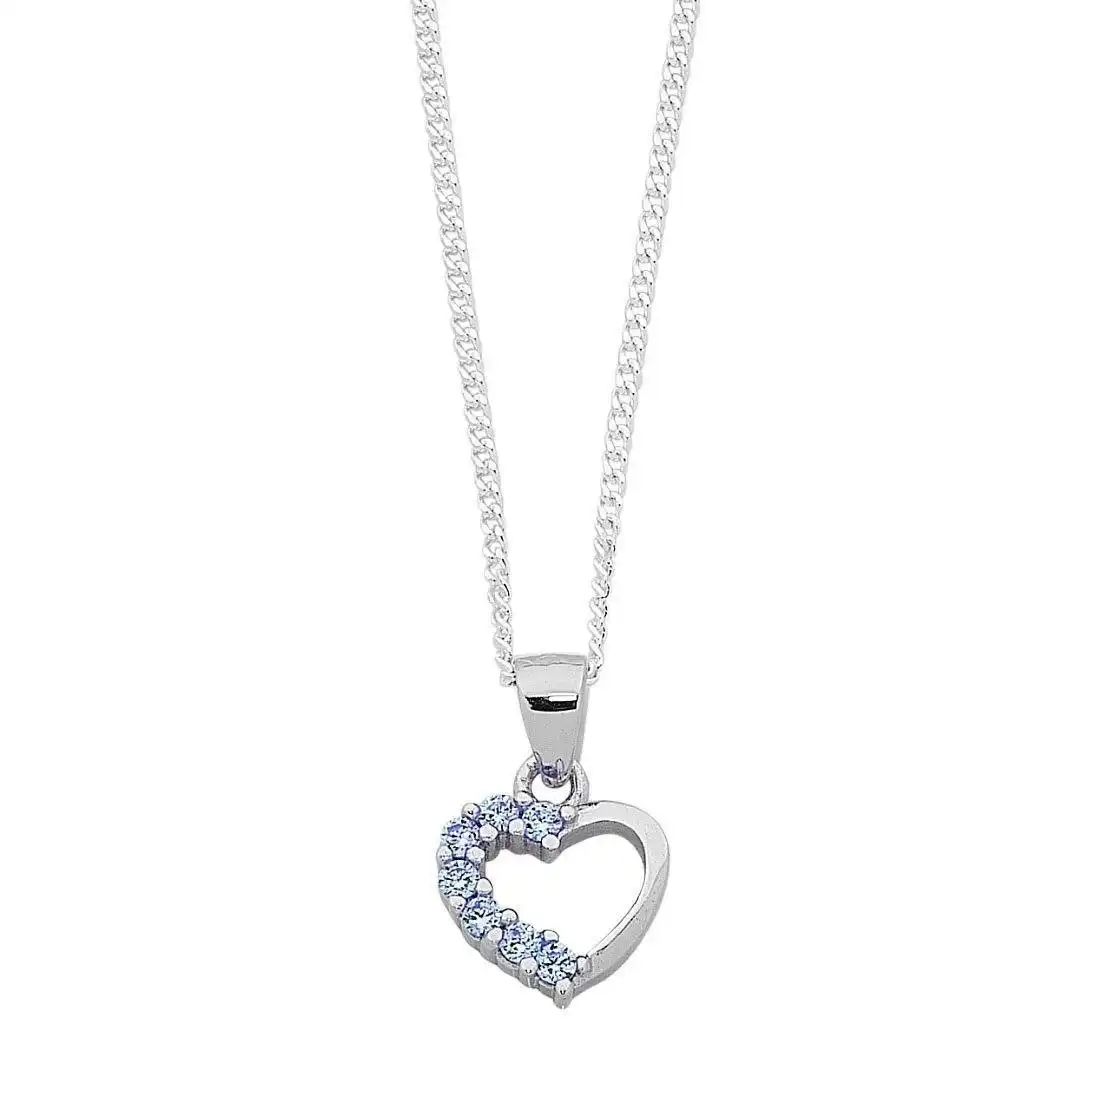 40cm Children's Light Blue Cubic Zirconia Heart Necklace in Sterling Silver